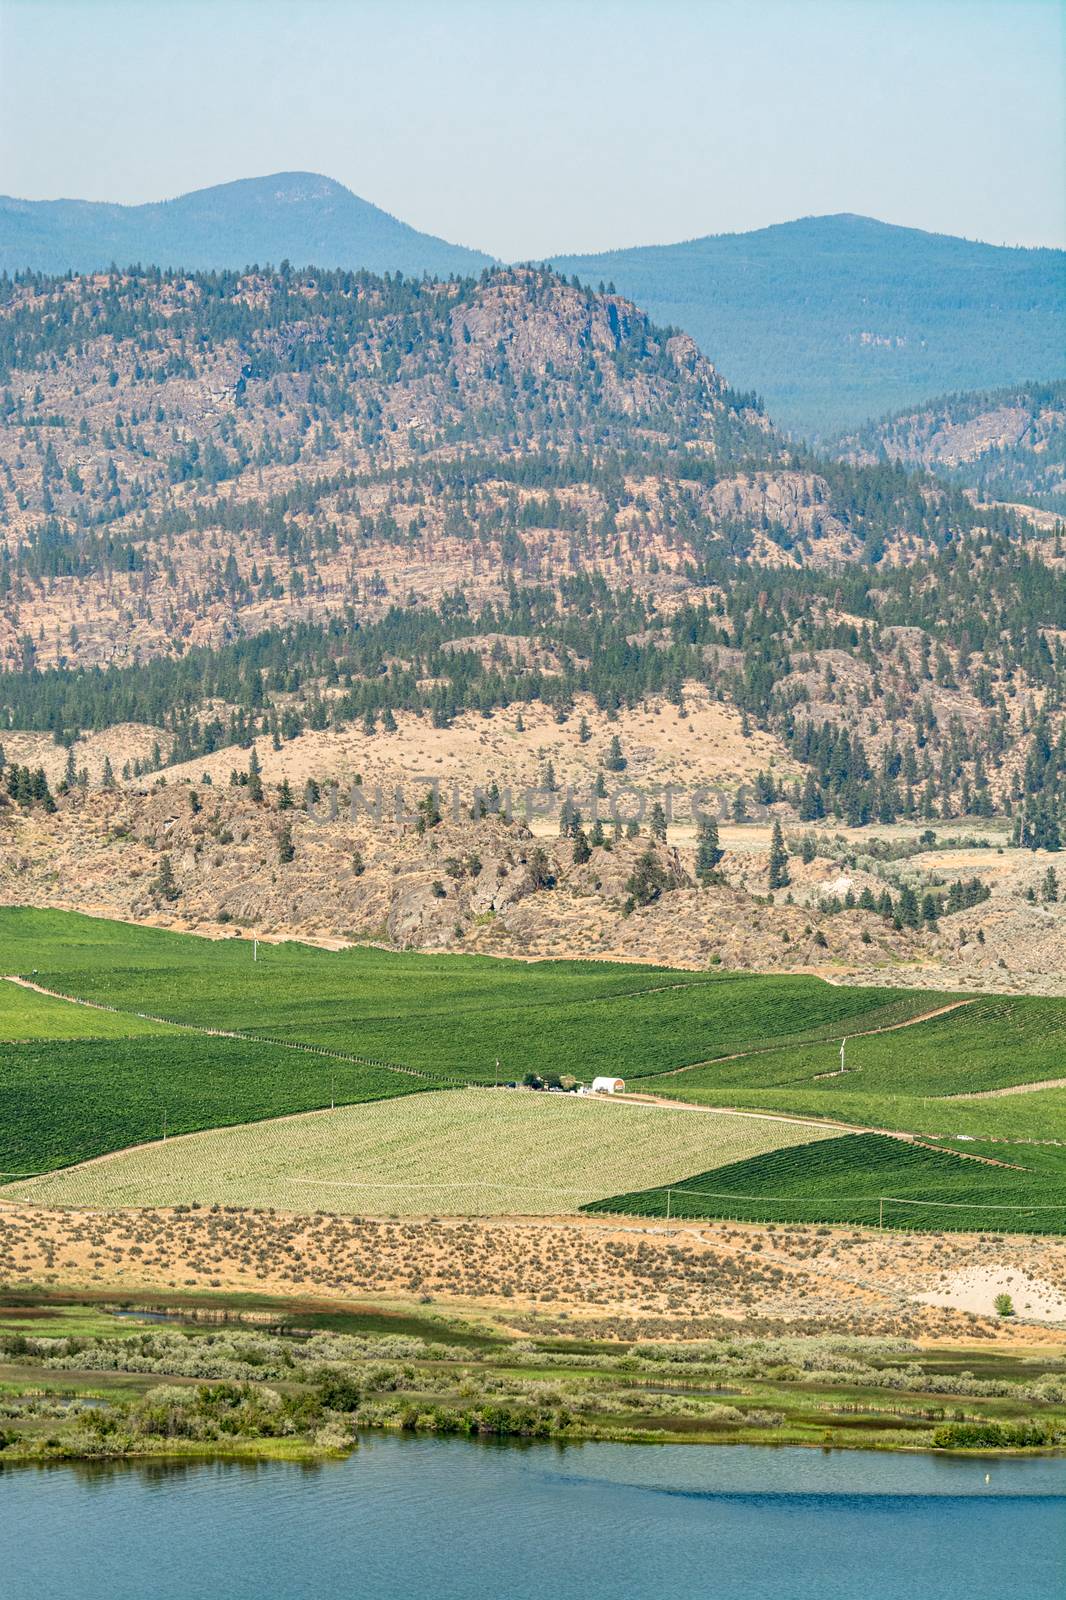 Okanagan valley view with farm land area and orchard fields on mountains and sky background